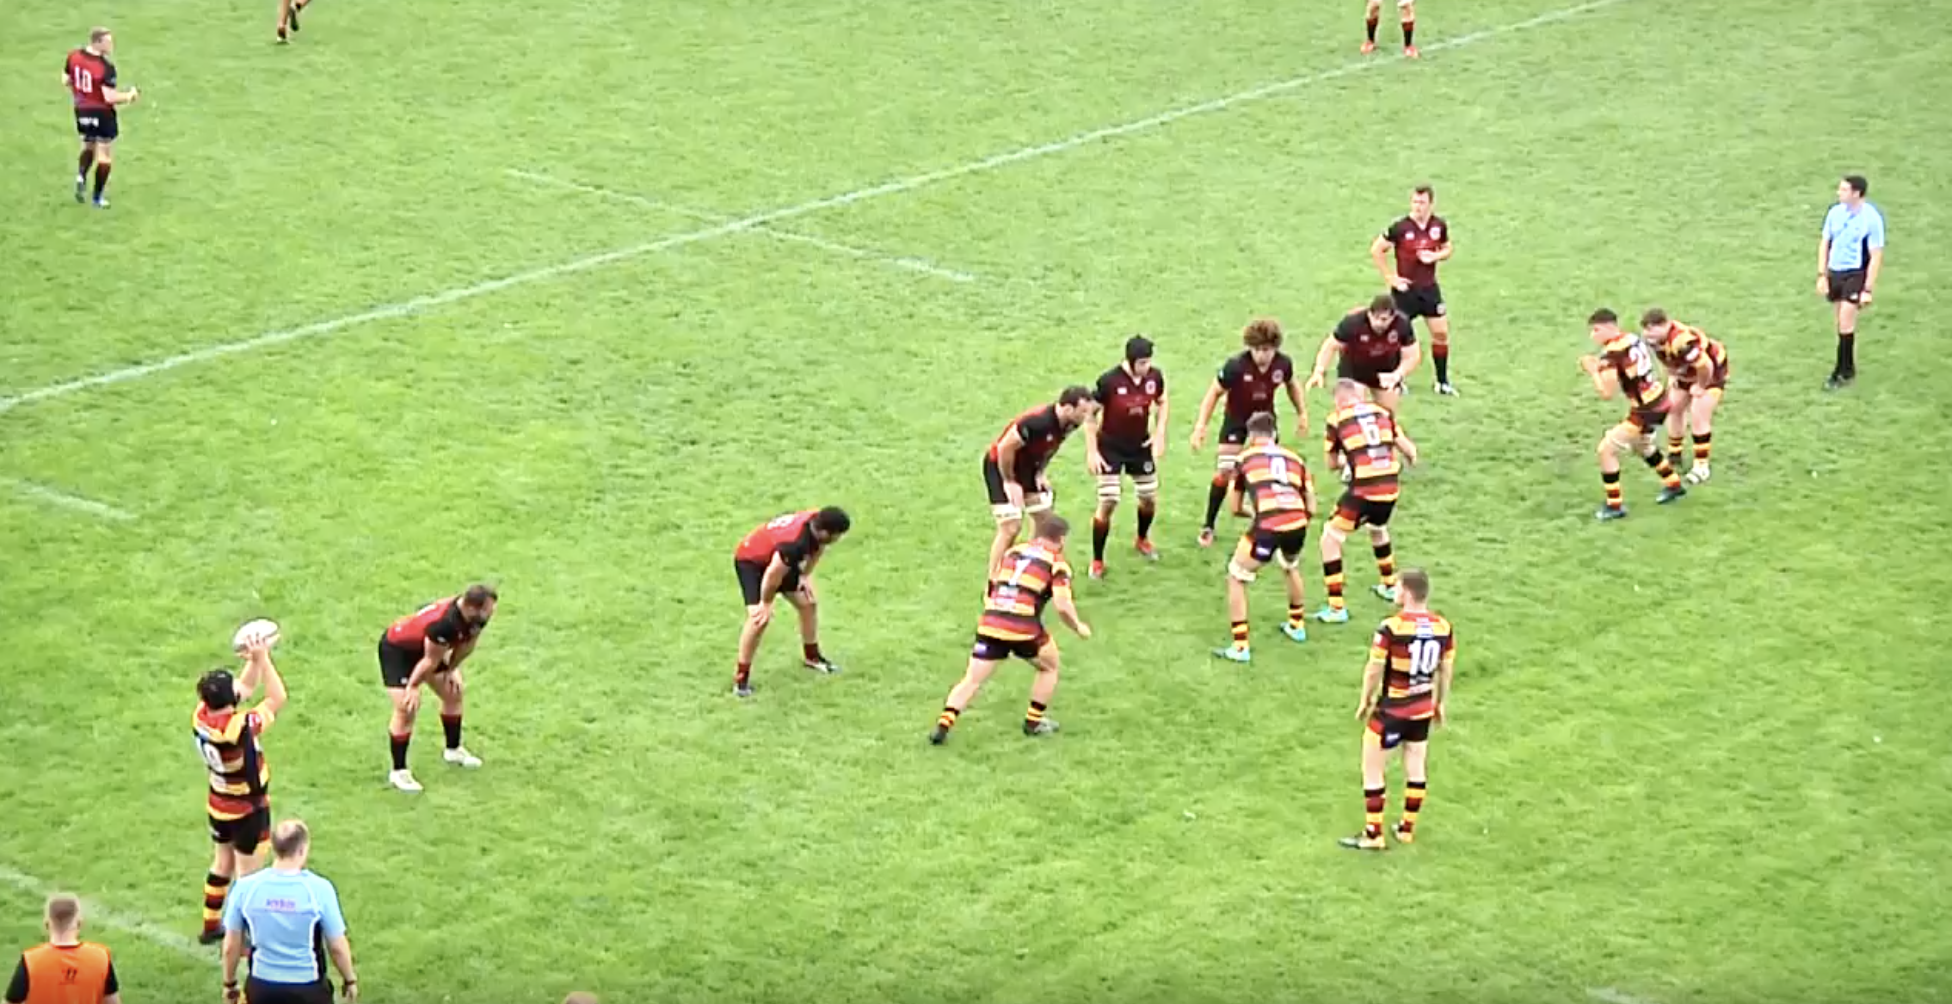 FAIL FRIDAY: Last play, 35 points each... player has absolute SHOCKER with unfound levels of try butchery